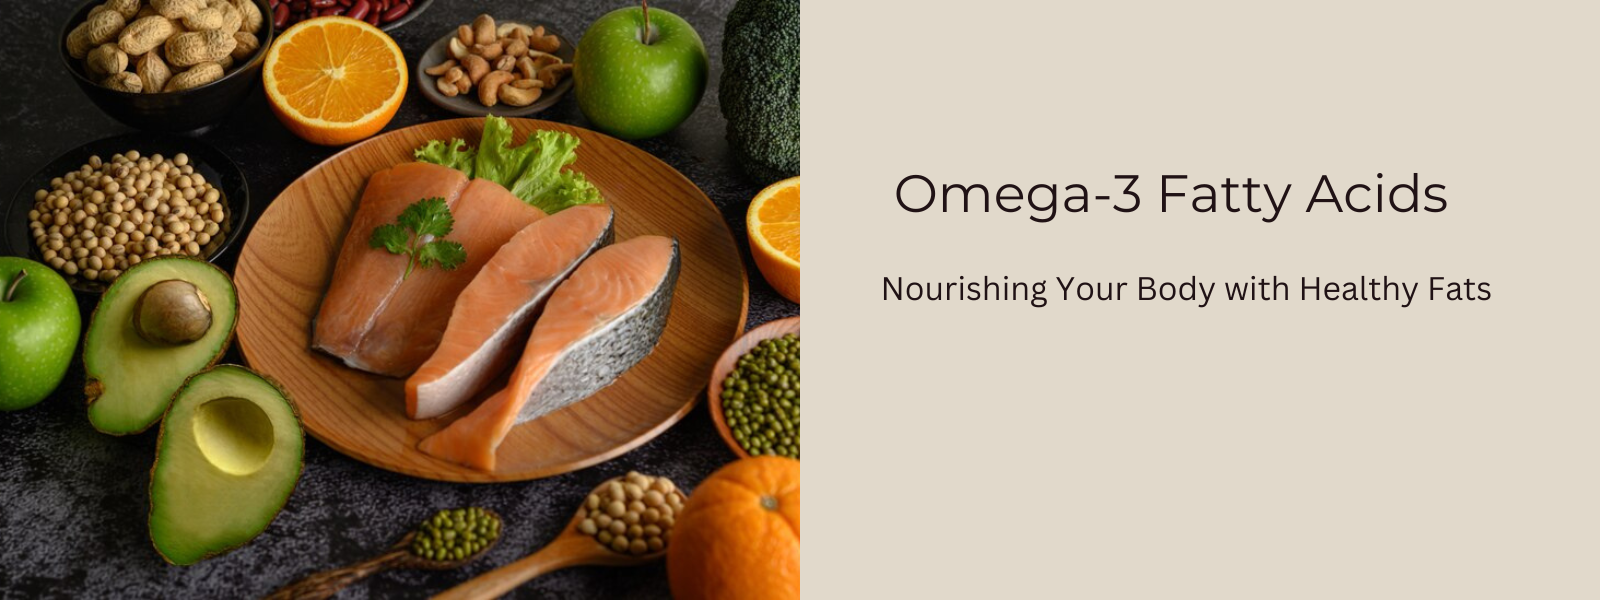 Omega-3 Fatty Acids: Nourishing Your Body with Healthy Fats